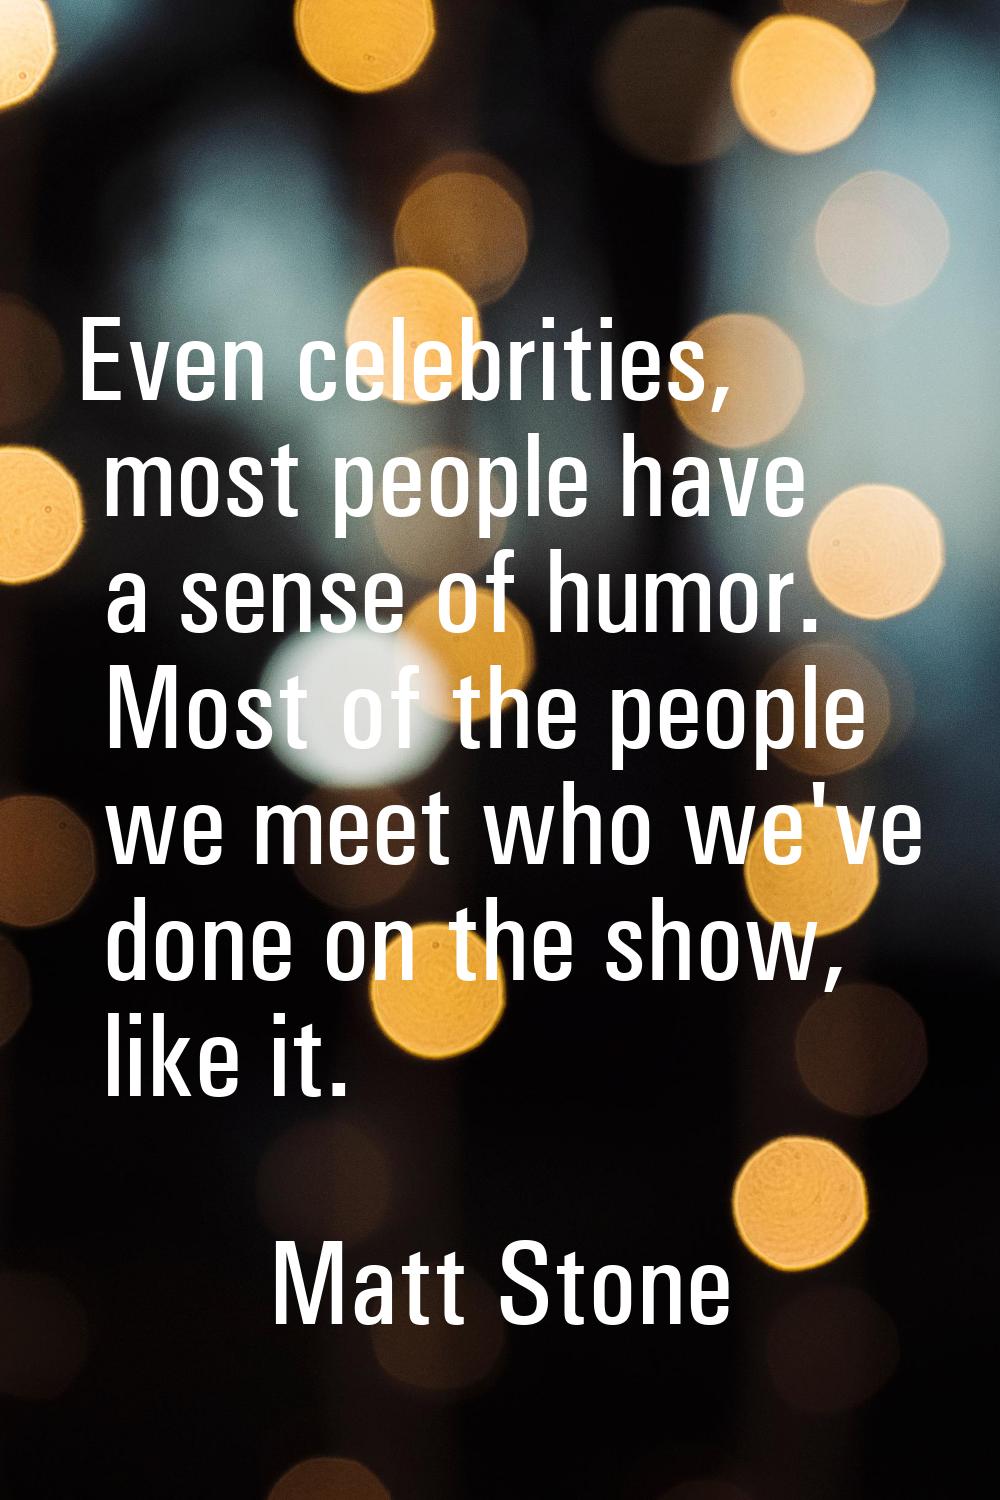 Even celebrities, most people have a sense of humor. Most of the people we meet who we've done on t